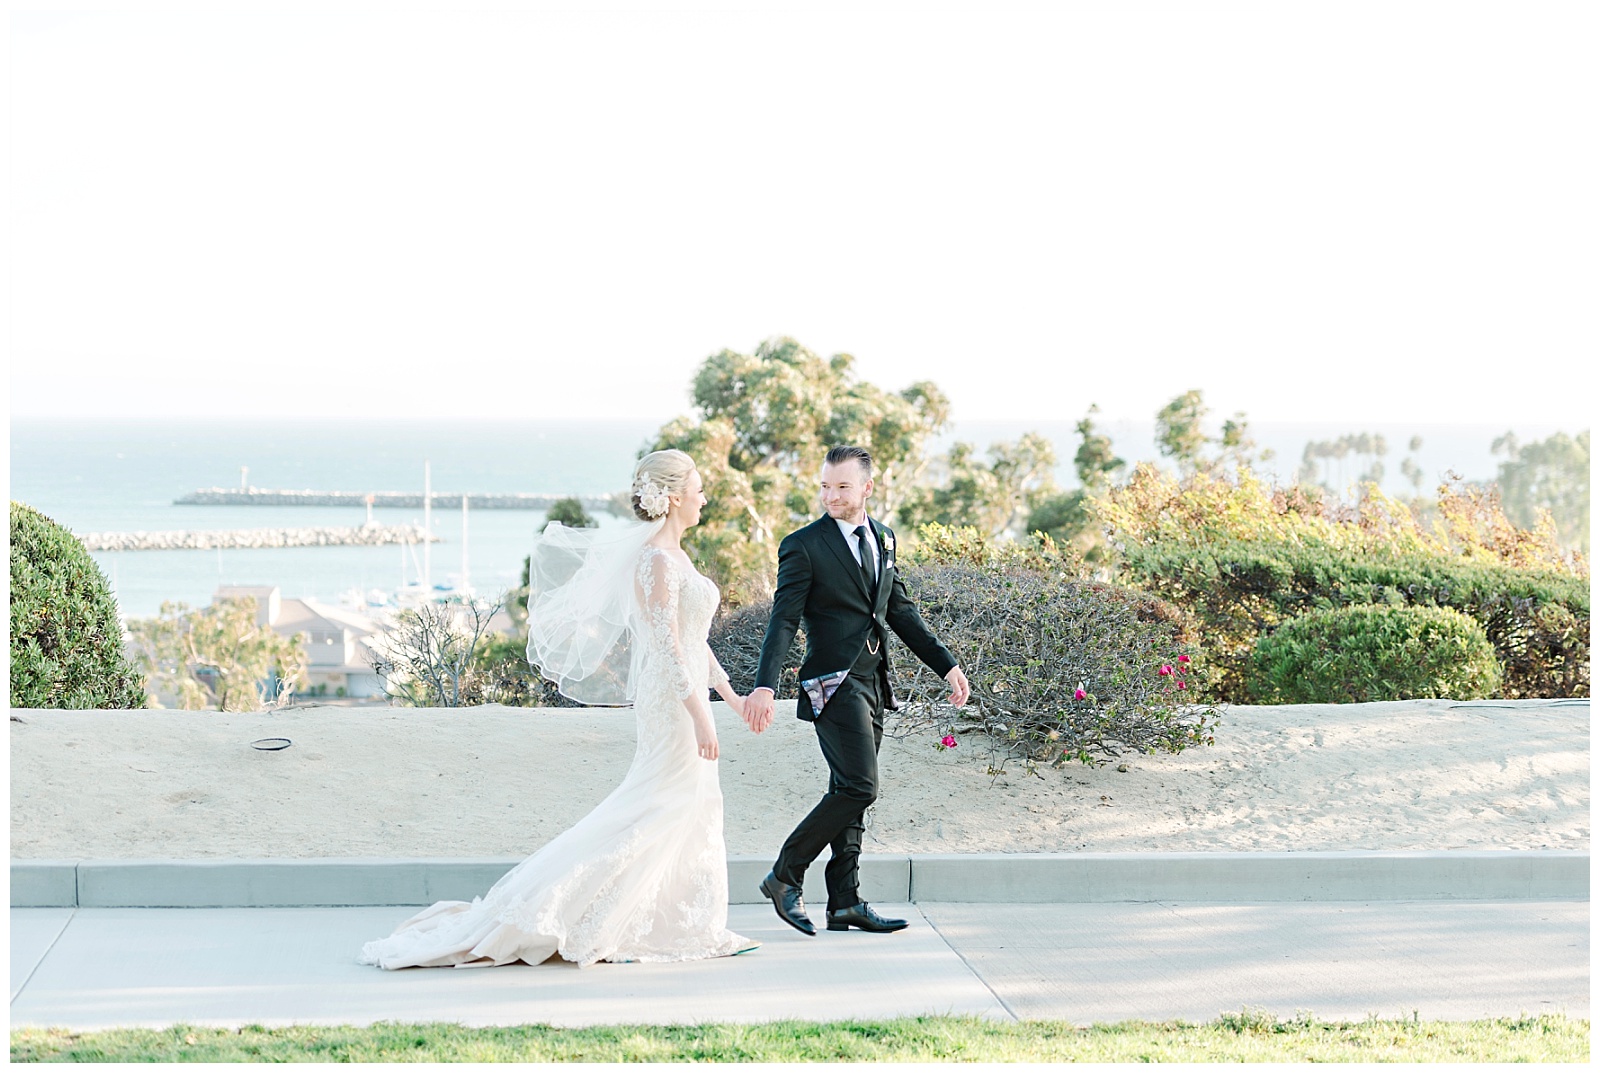 Laguna Cliffs Marriott Wedding in Dana Point. Photography by Mollie Jane Photography. To see more go to www.molliejanephotography.com.